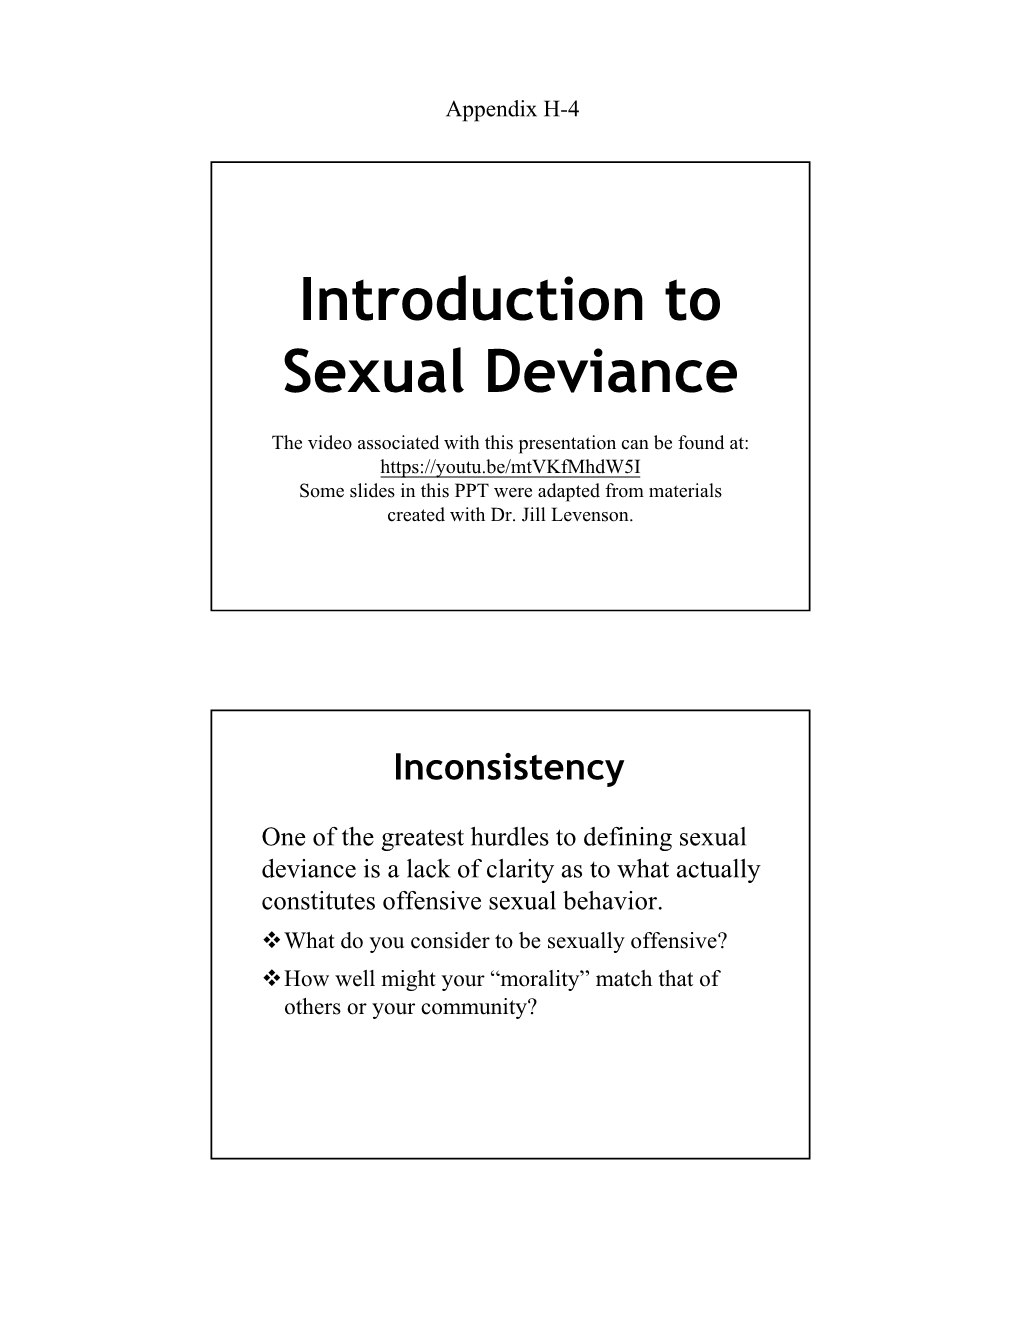 Introduction to Sexual Deviance